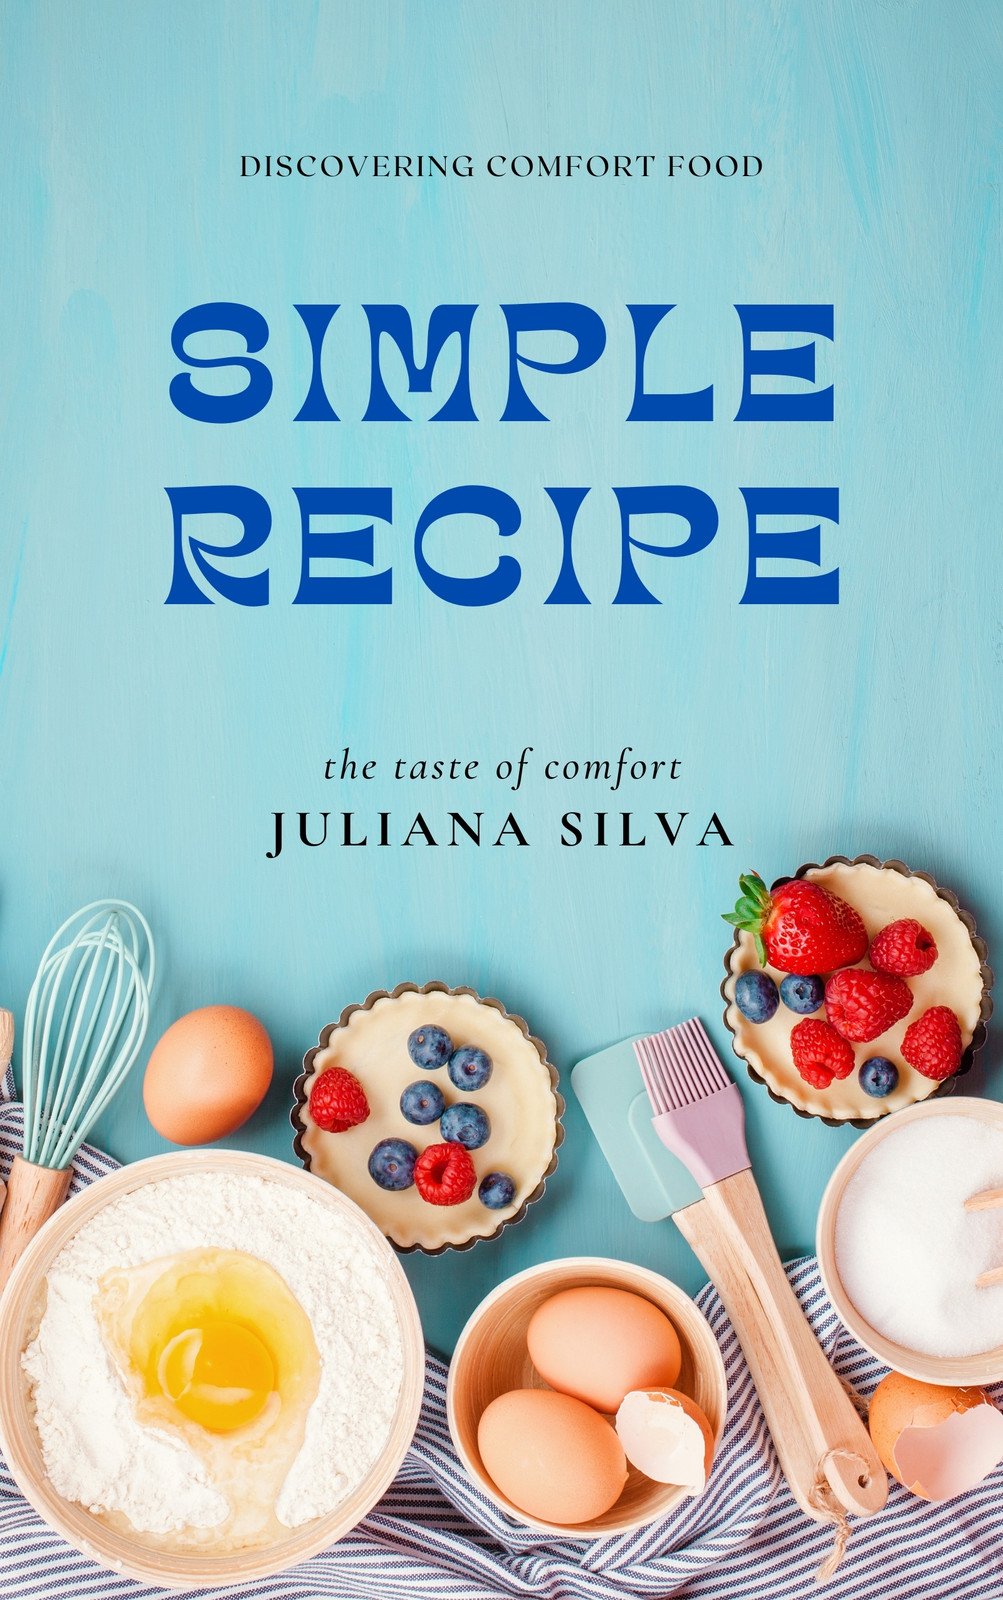 How to Design a Personalized Recipe Book in Canva - A Step-by-Step